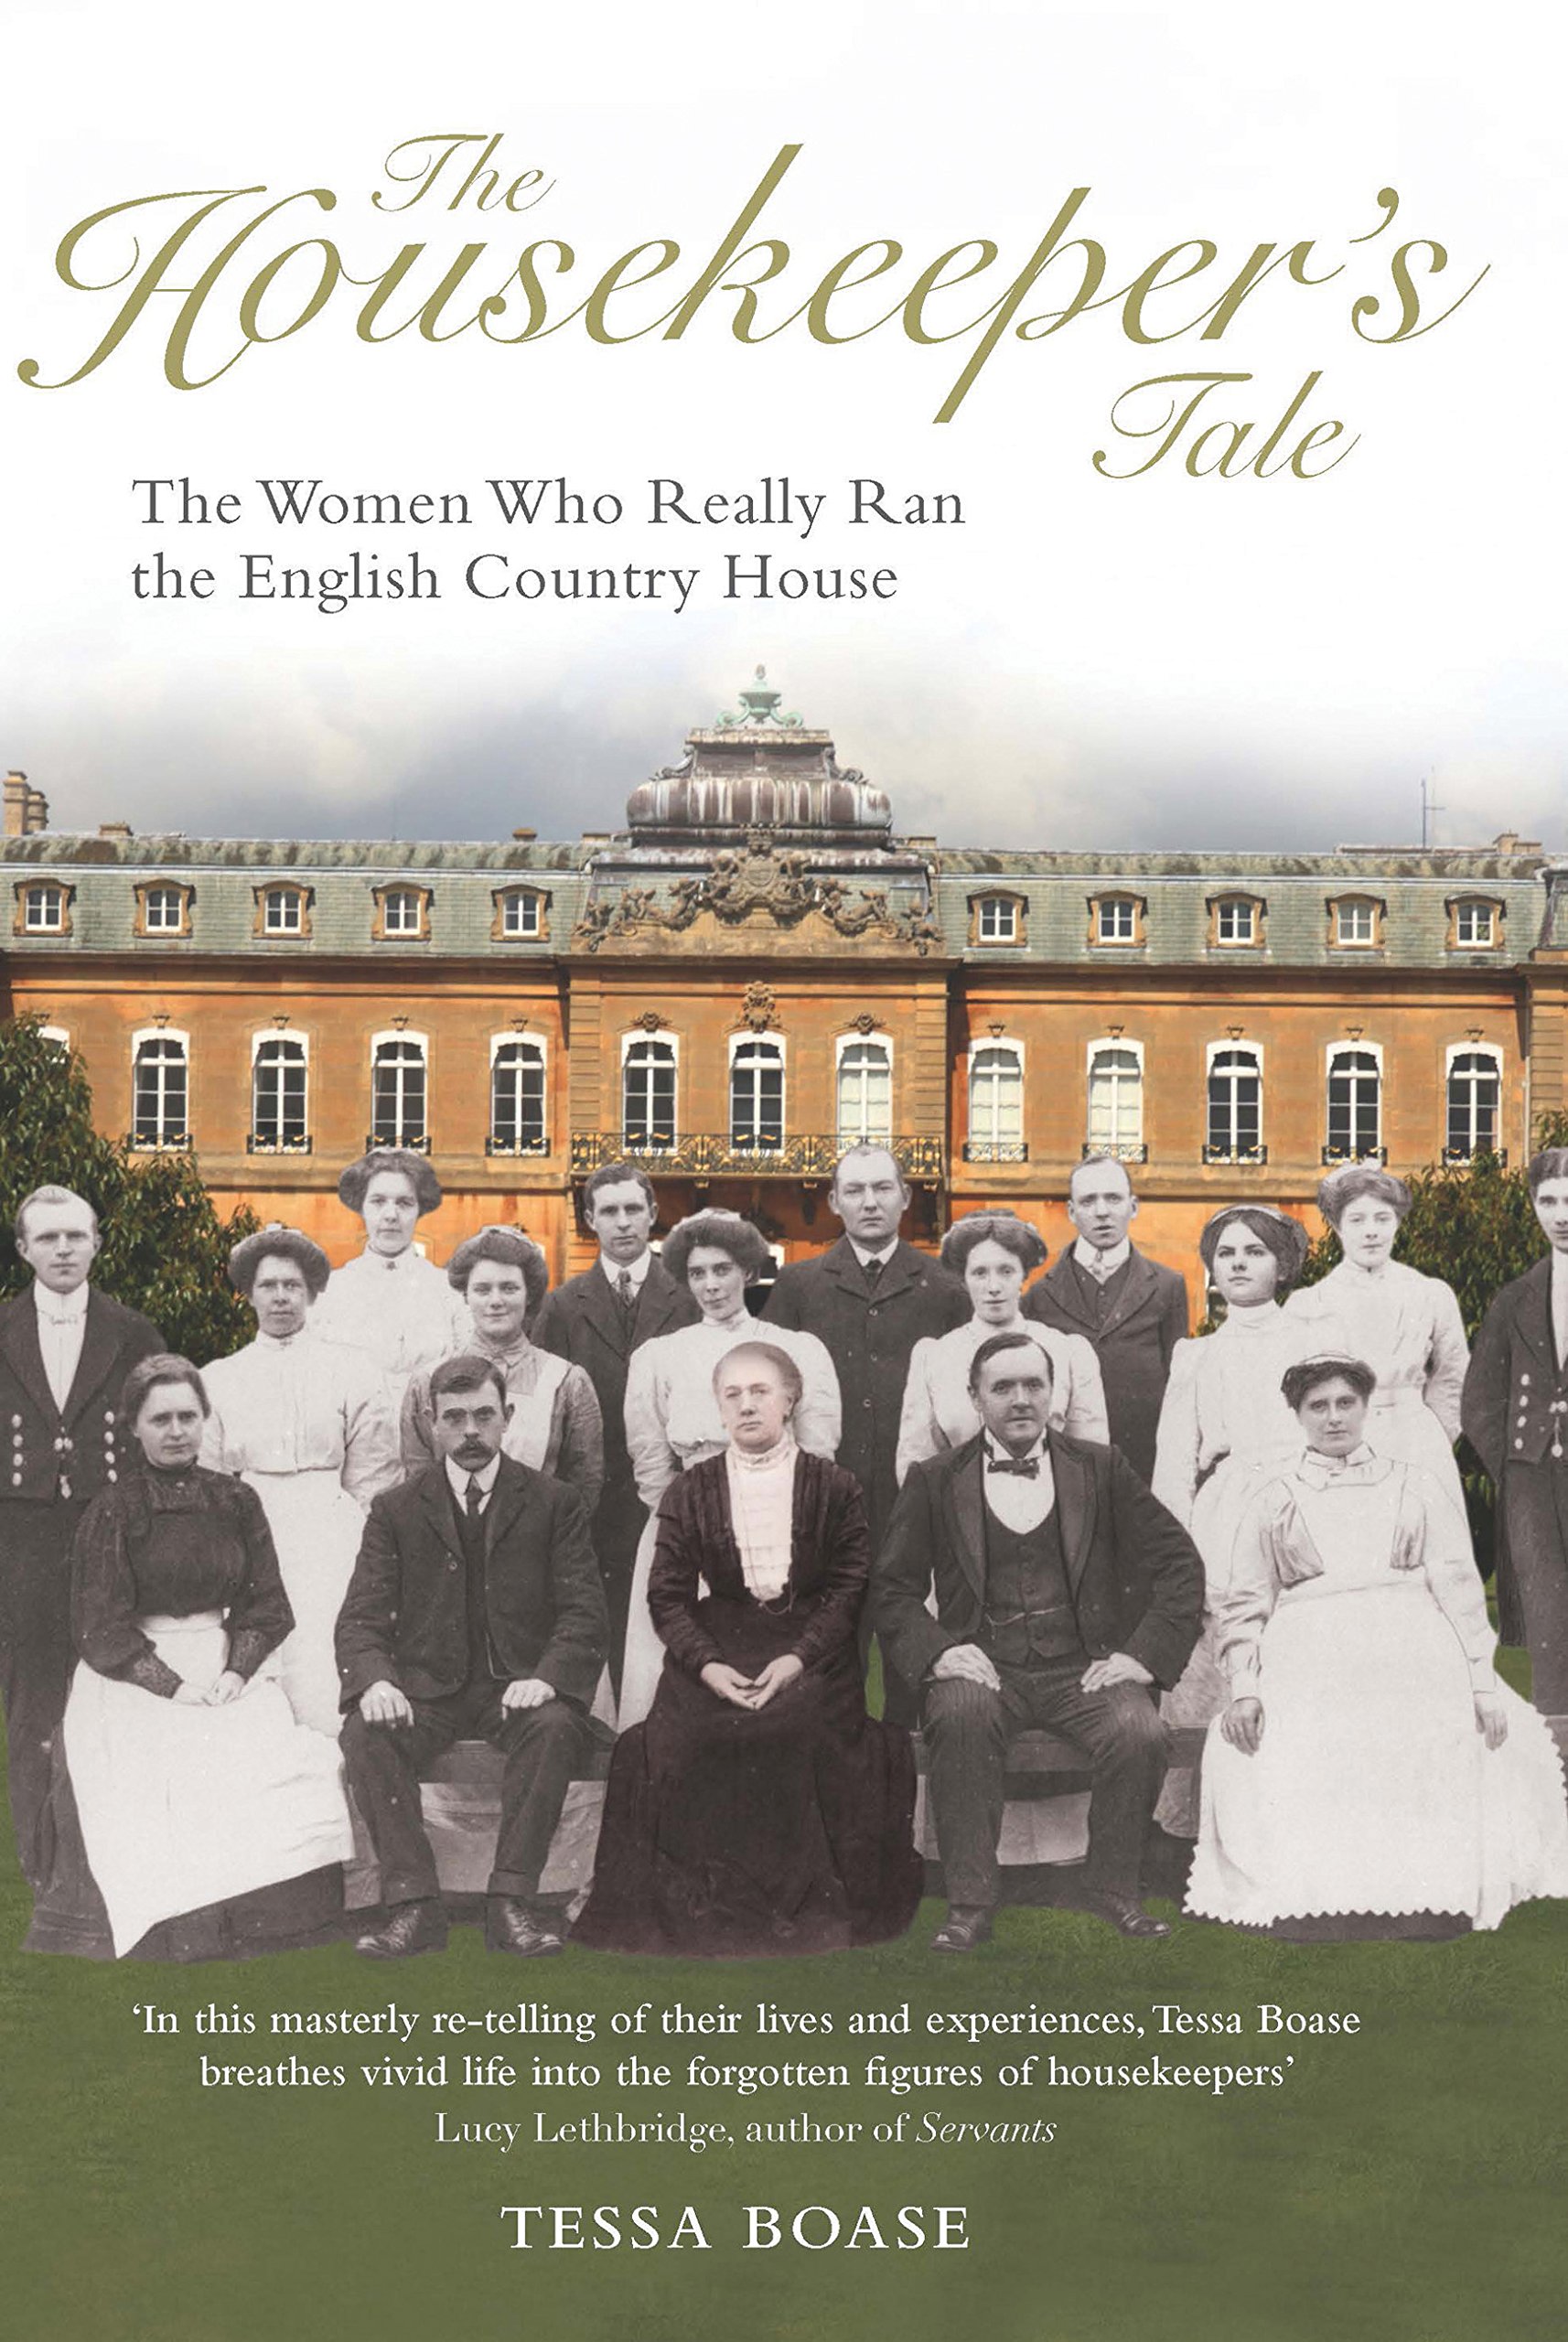 The Housekeeper's Tale - The Women who really ran the English Country House